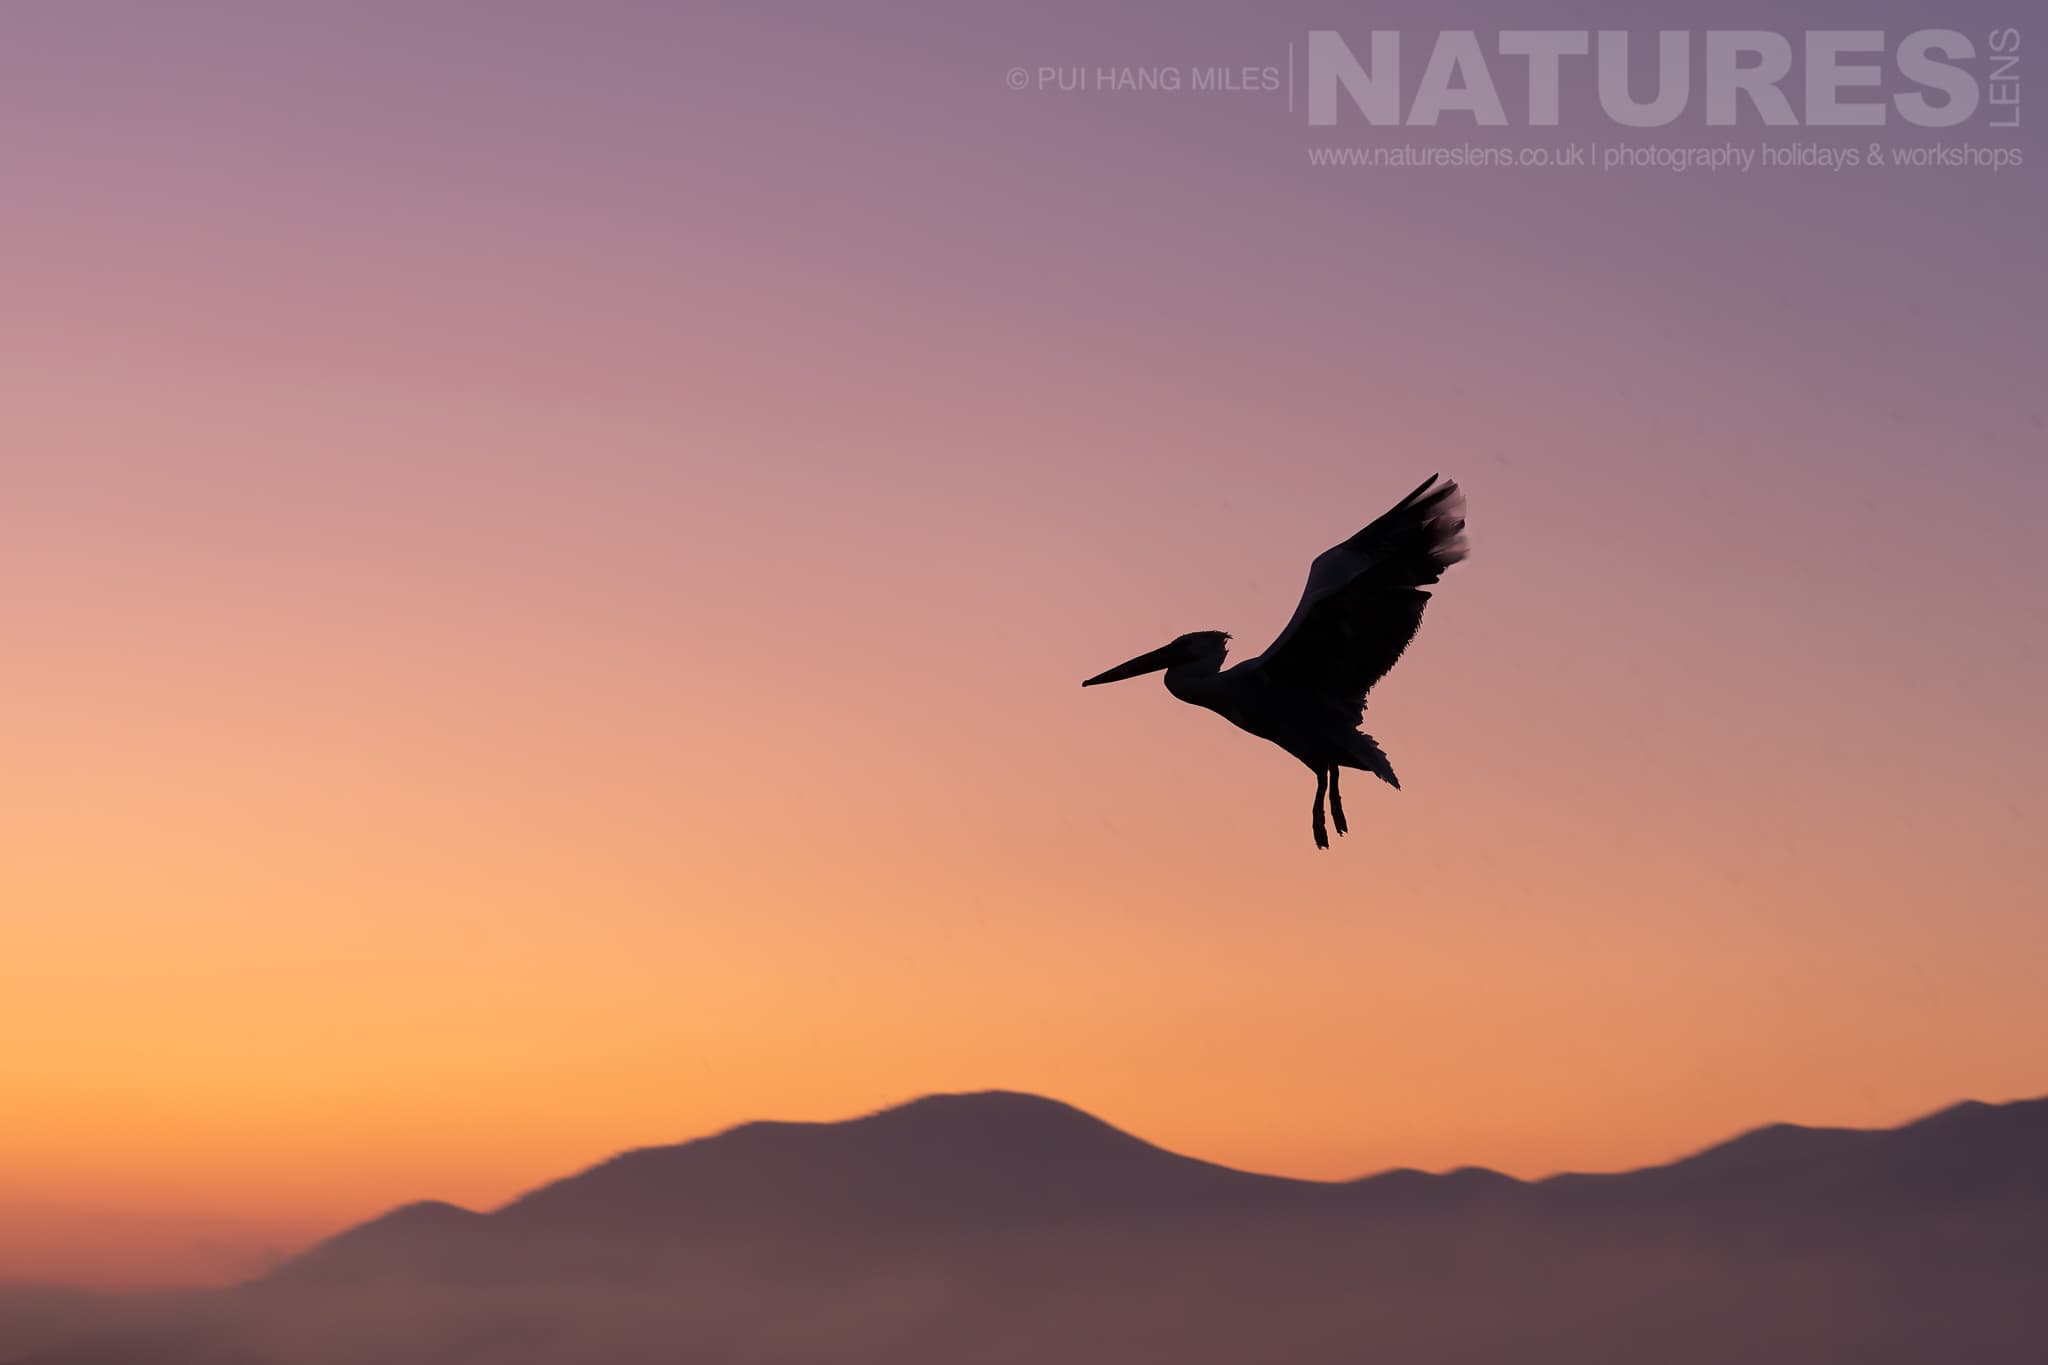 One Of The Pelicans Of Lake Kerkini Flies Across With The Mountains As The Backdrop Photographed During A Natureslens Pelicans Of Lake Kerkini Photography Holiday